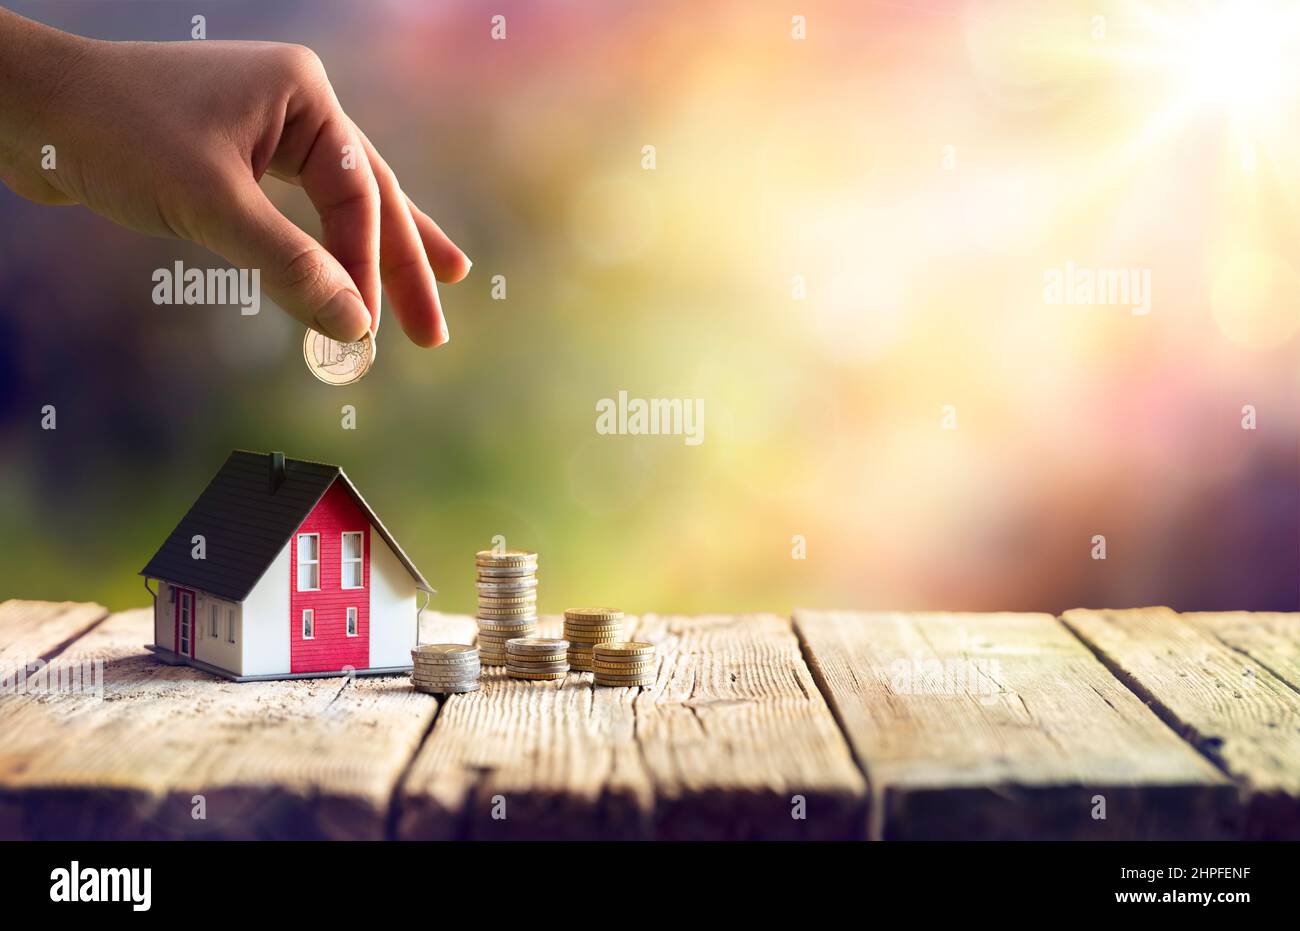 Real Estate - House and Money Coins For Investment Concepts Stock Photo